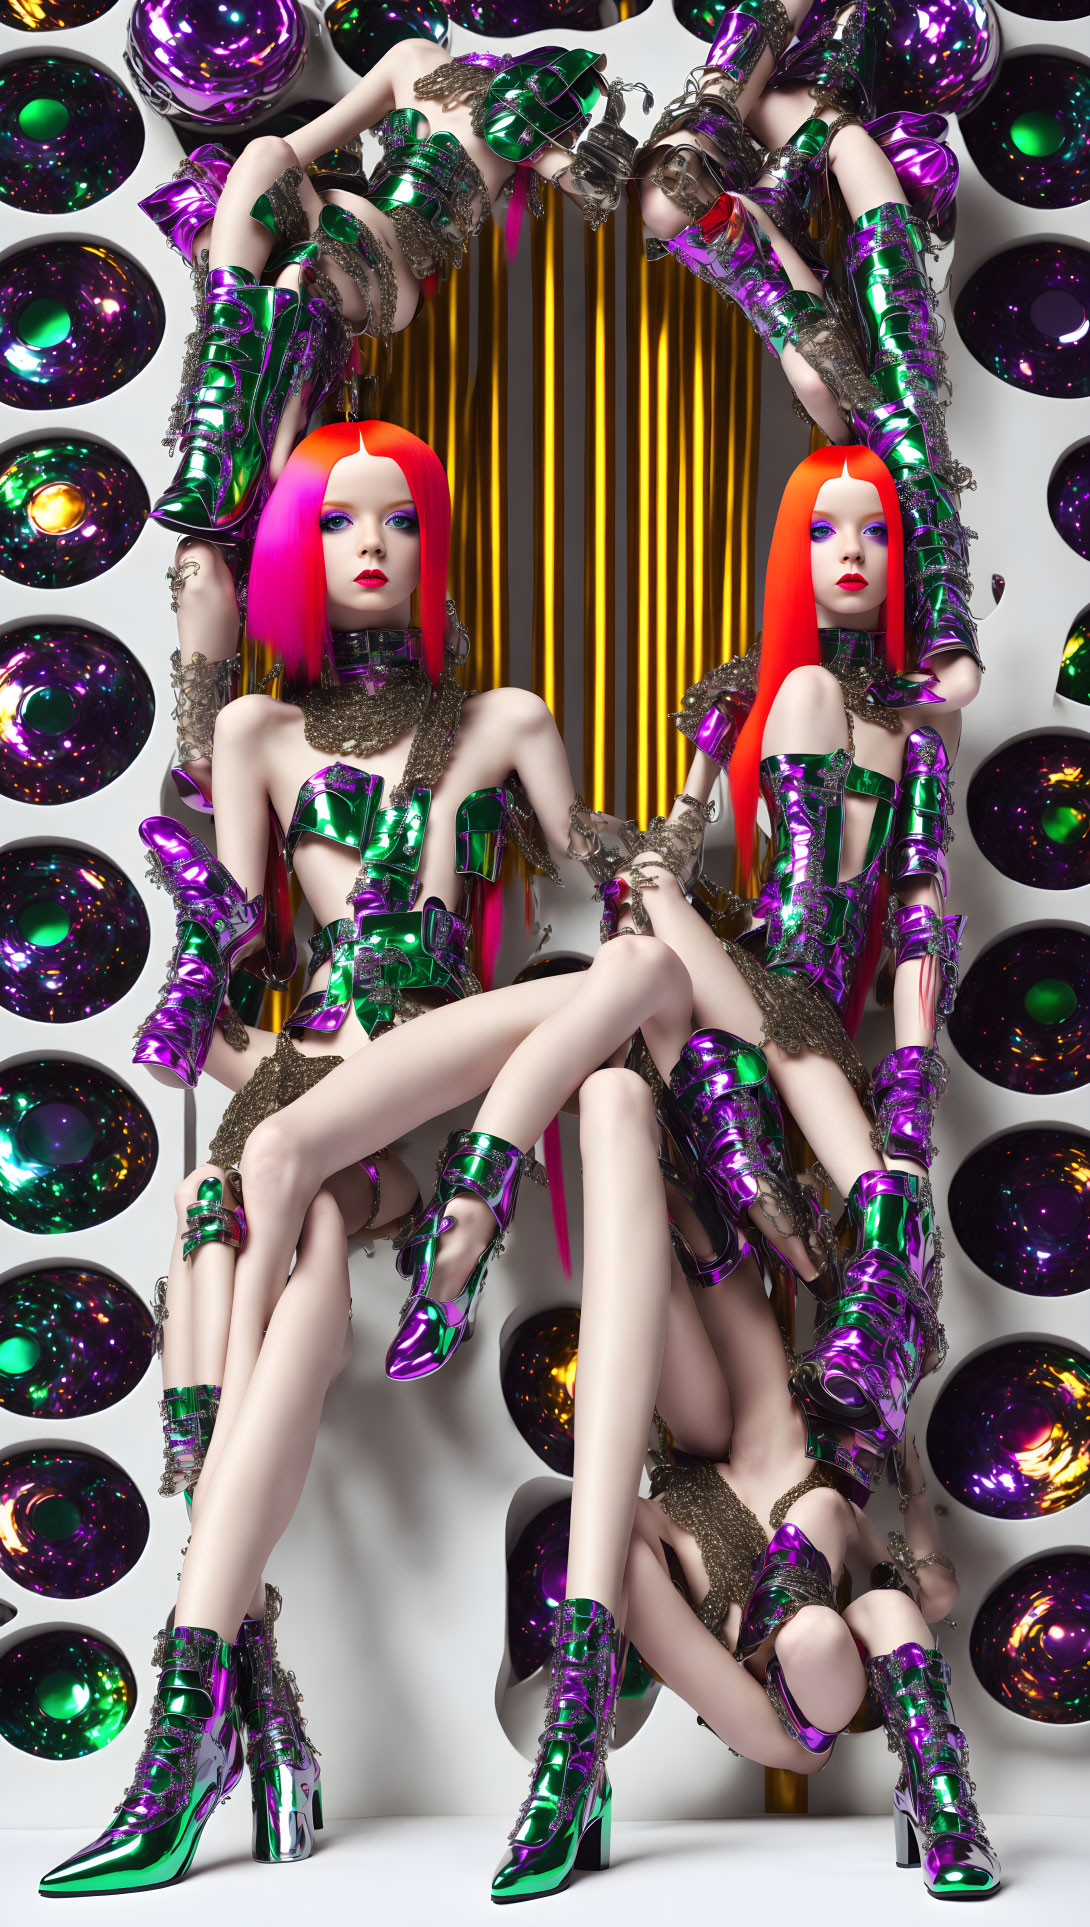 Identical models in red hair, futuristic outfits, and shiny boots against colorful circles.